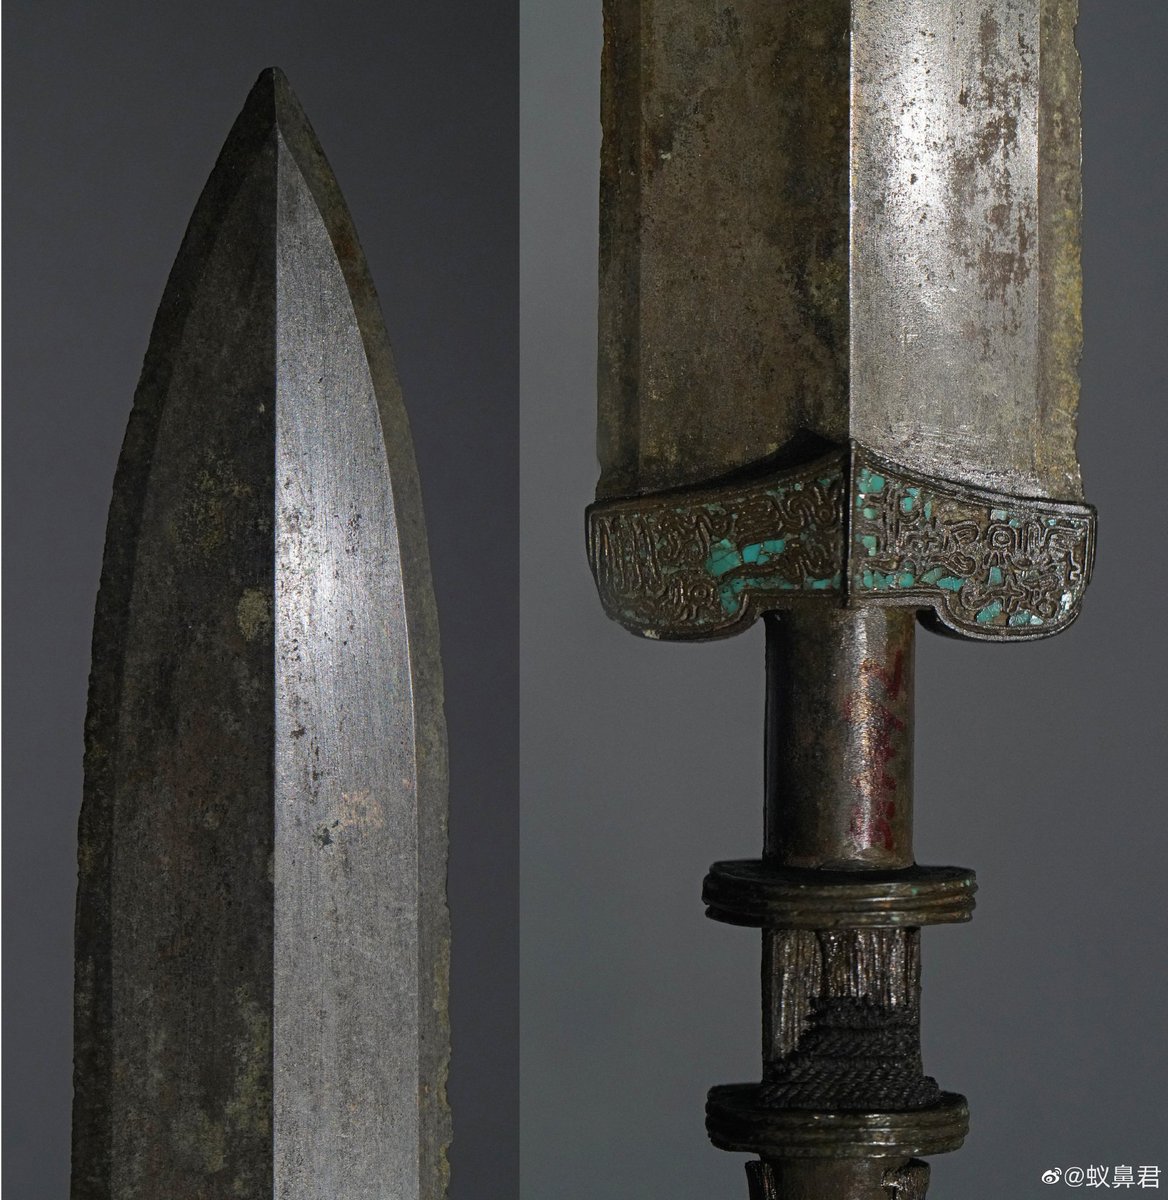 There are many kinds of swords in China during the Warring States Period, and these are just among them.